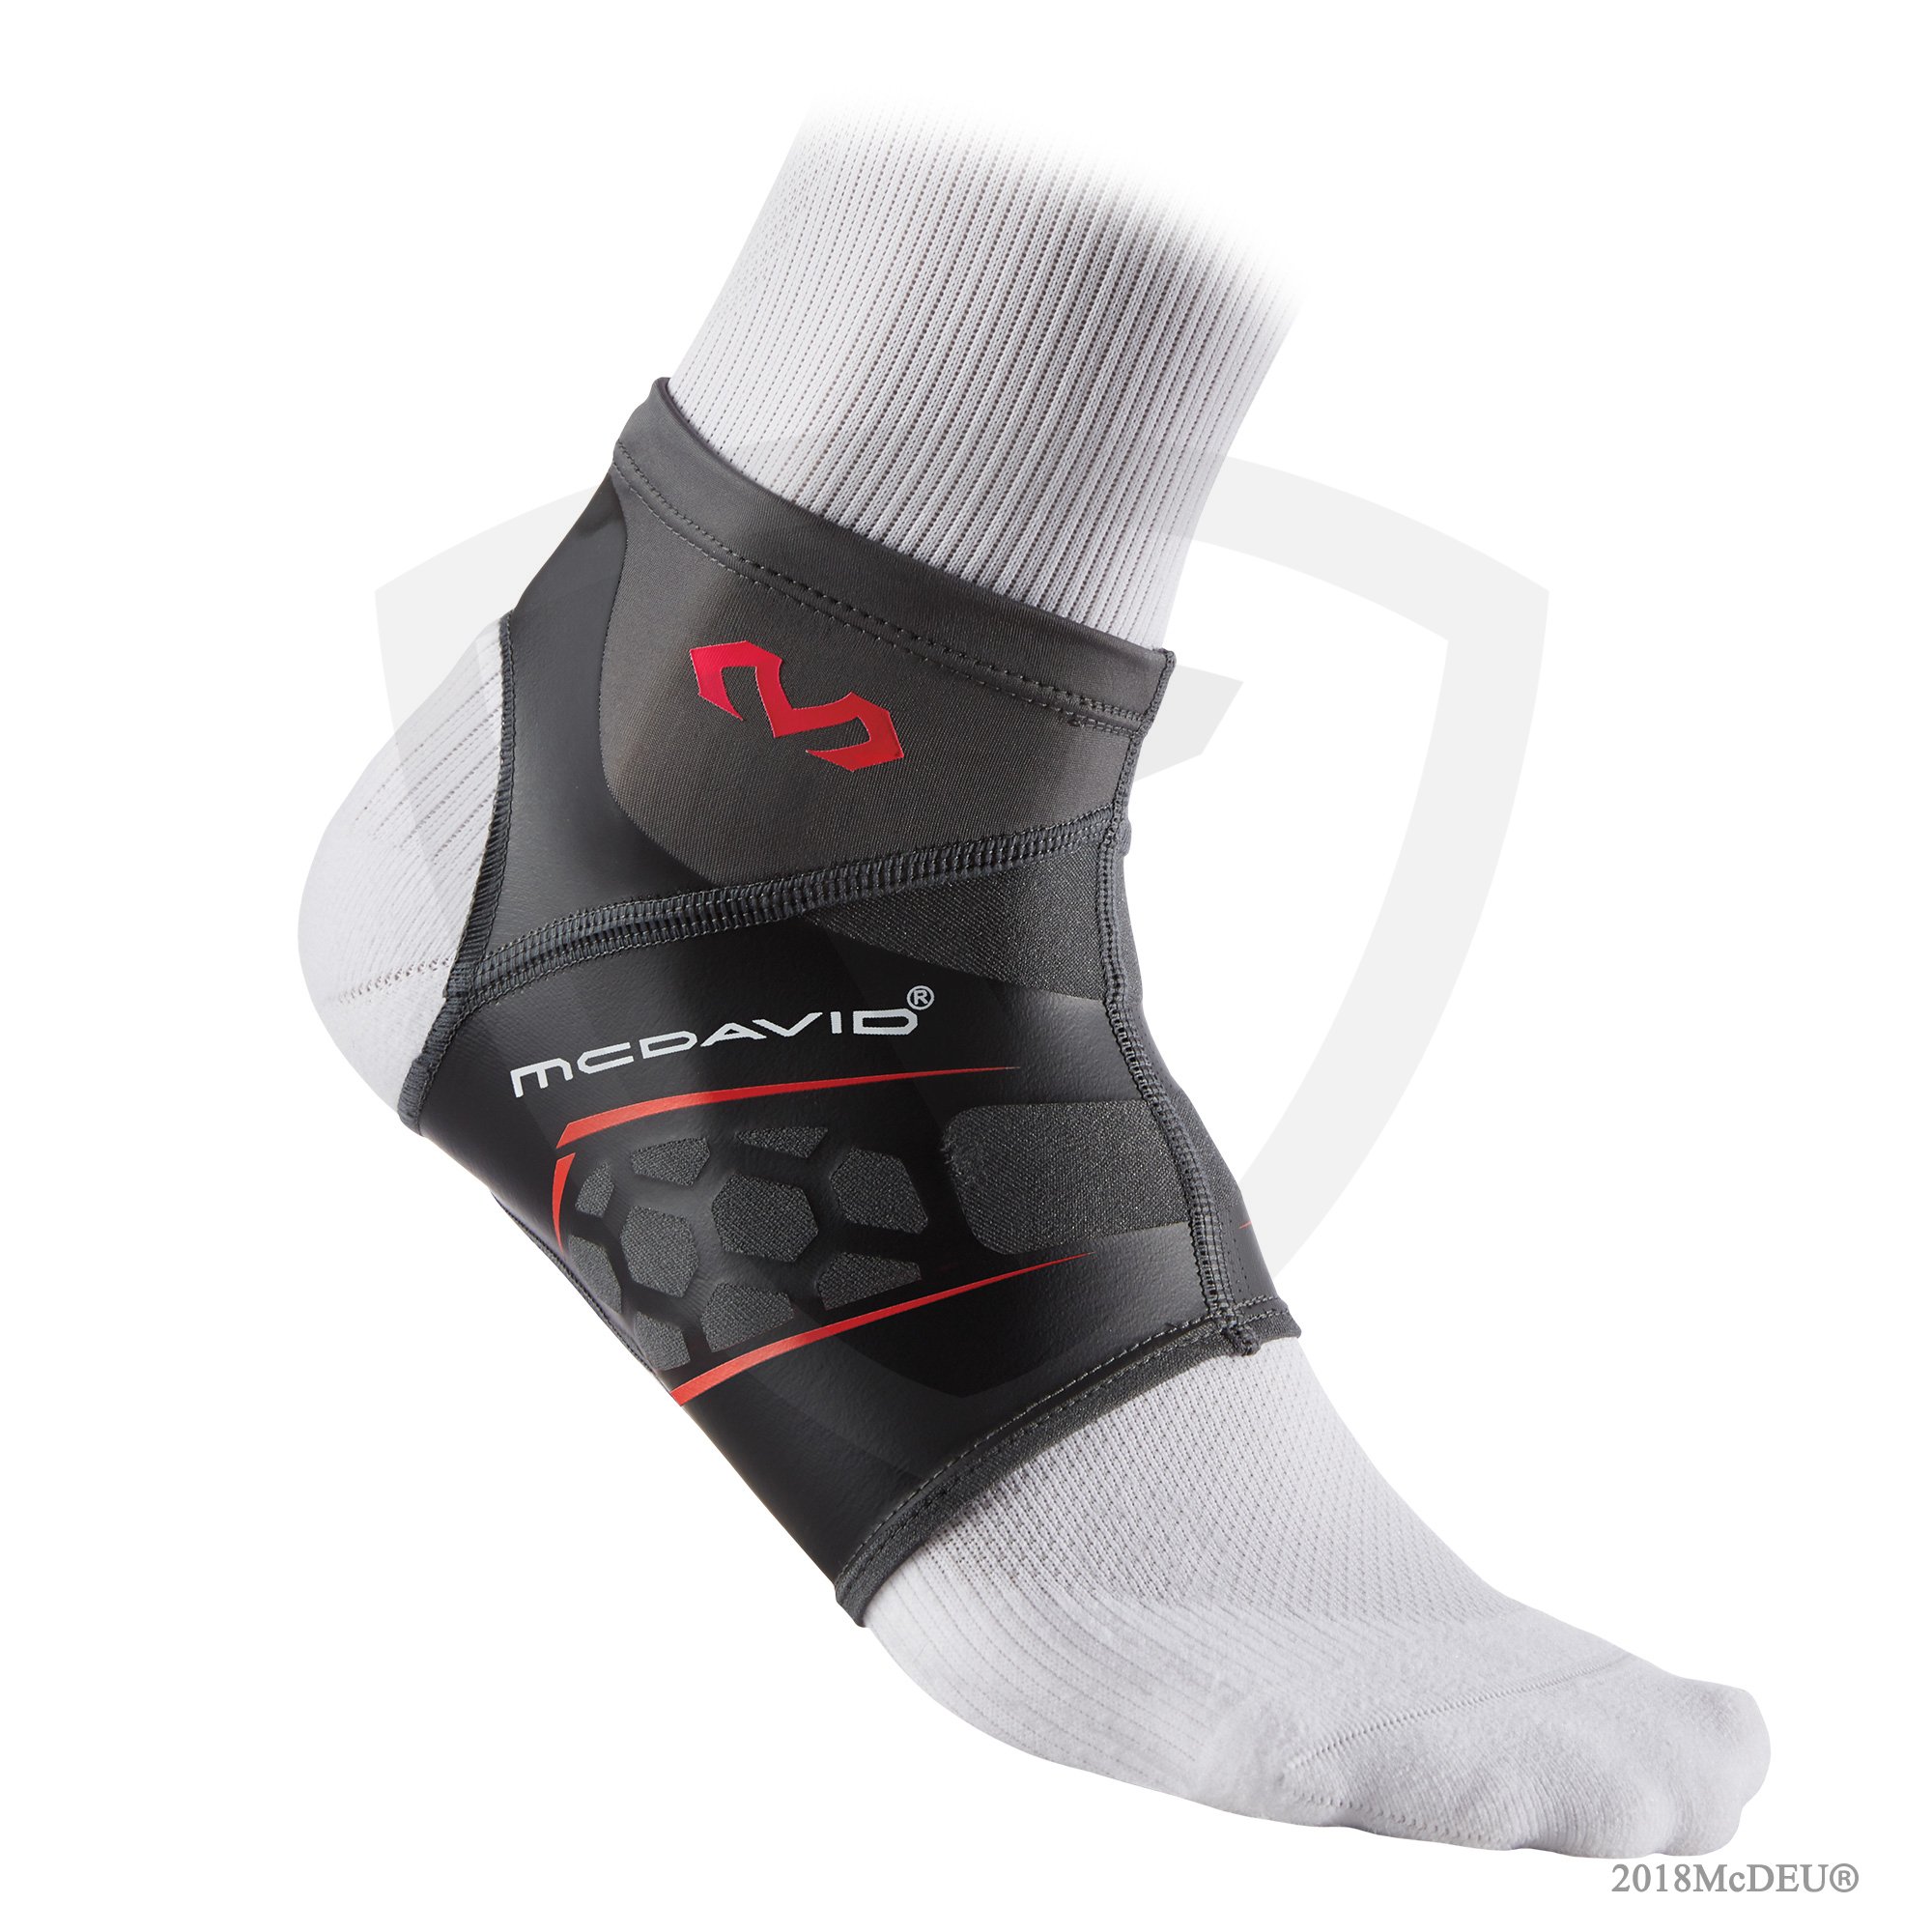 McDavid 4101 Runners Therapy Plantar Fasciitis Sleeve RIGHT S